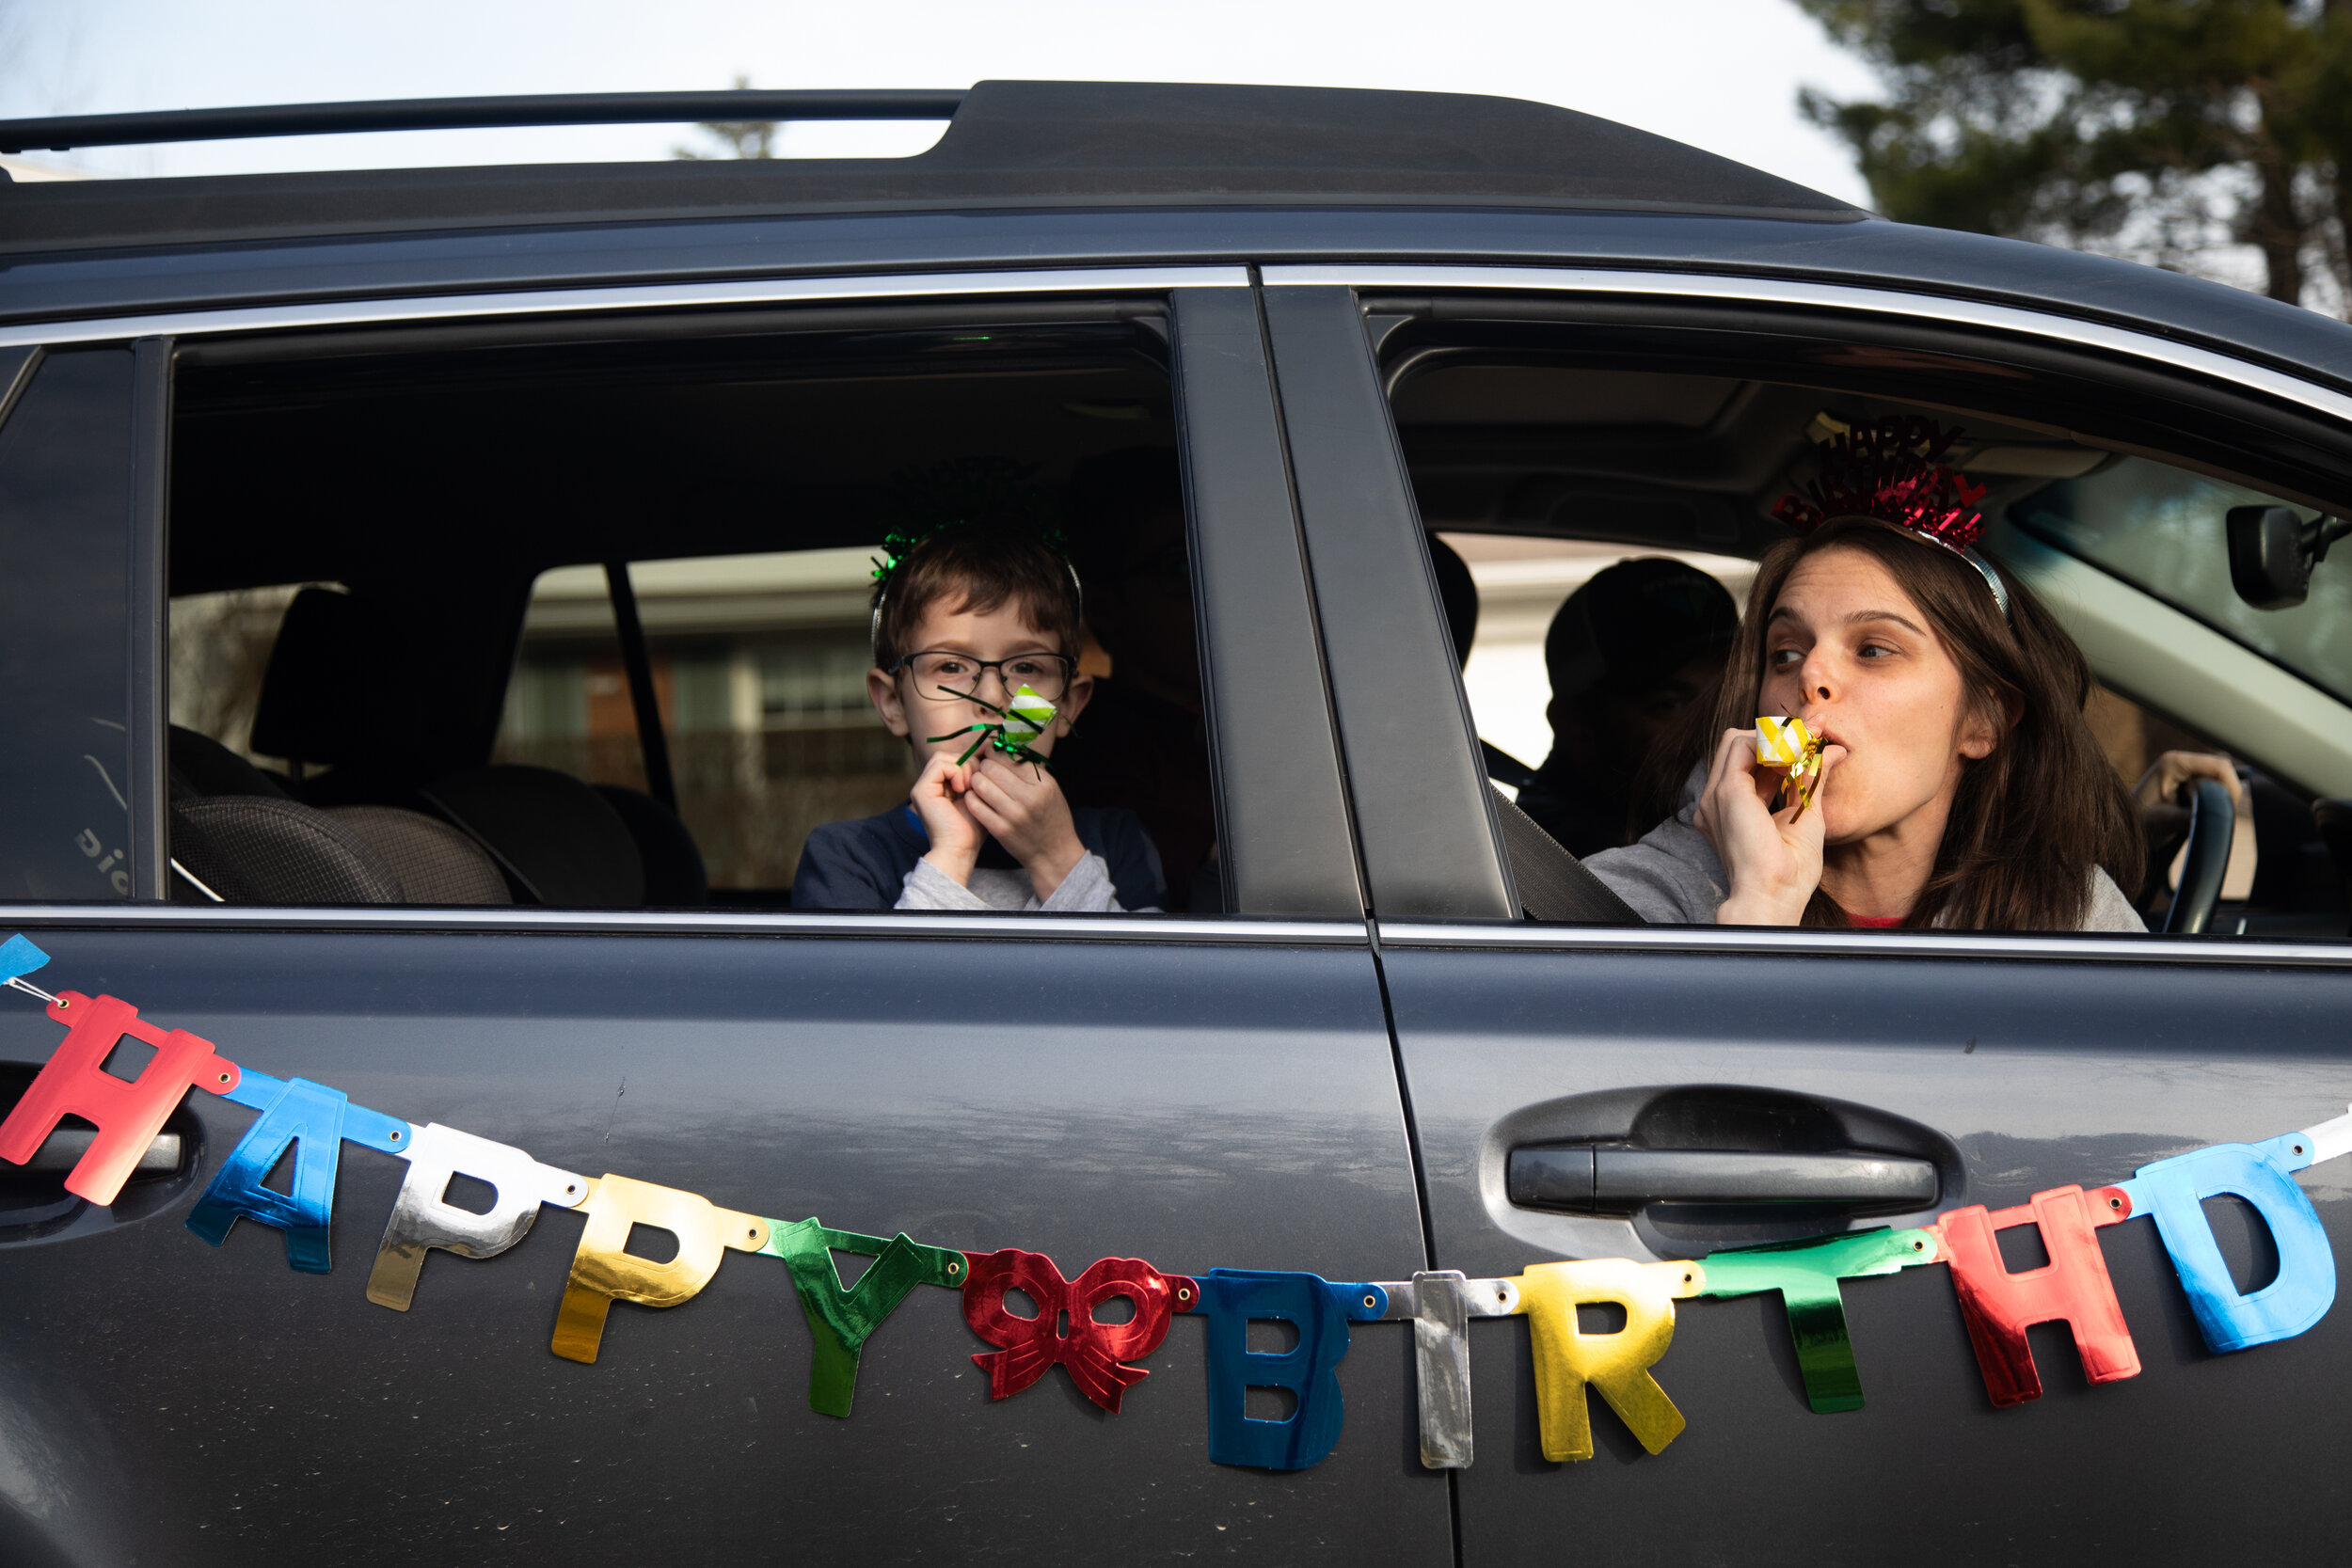  Dana Baer and her son, Jacob, wish Avery Slutsky a happy 6th birthday during a drive-by birthday celebration to maintain social distancing in West Bloomfield Township, Michigan. (Emily Elconin for REUTERS) 